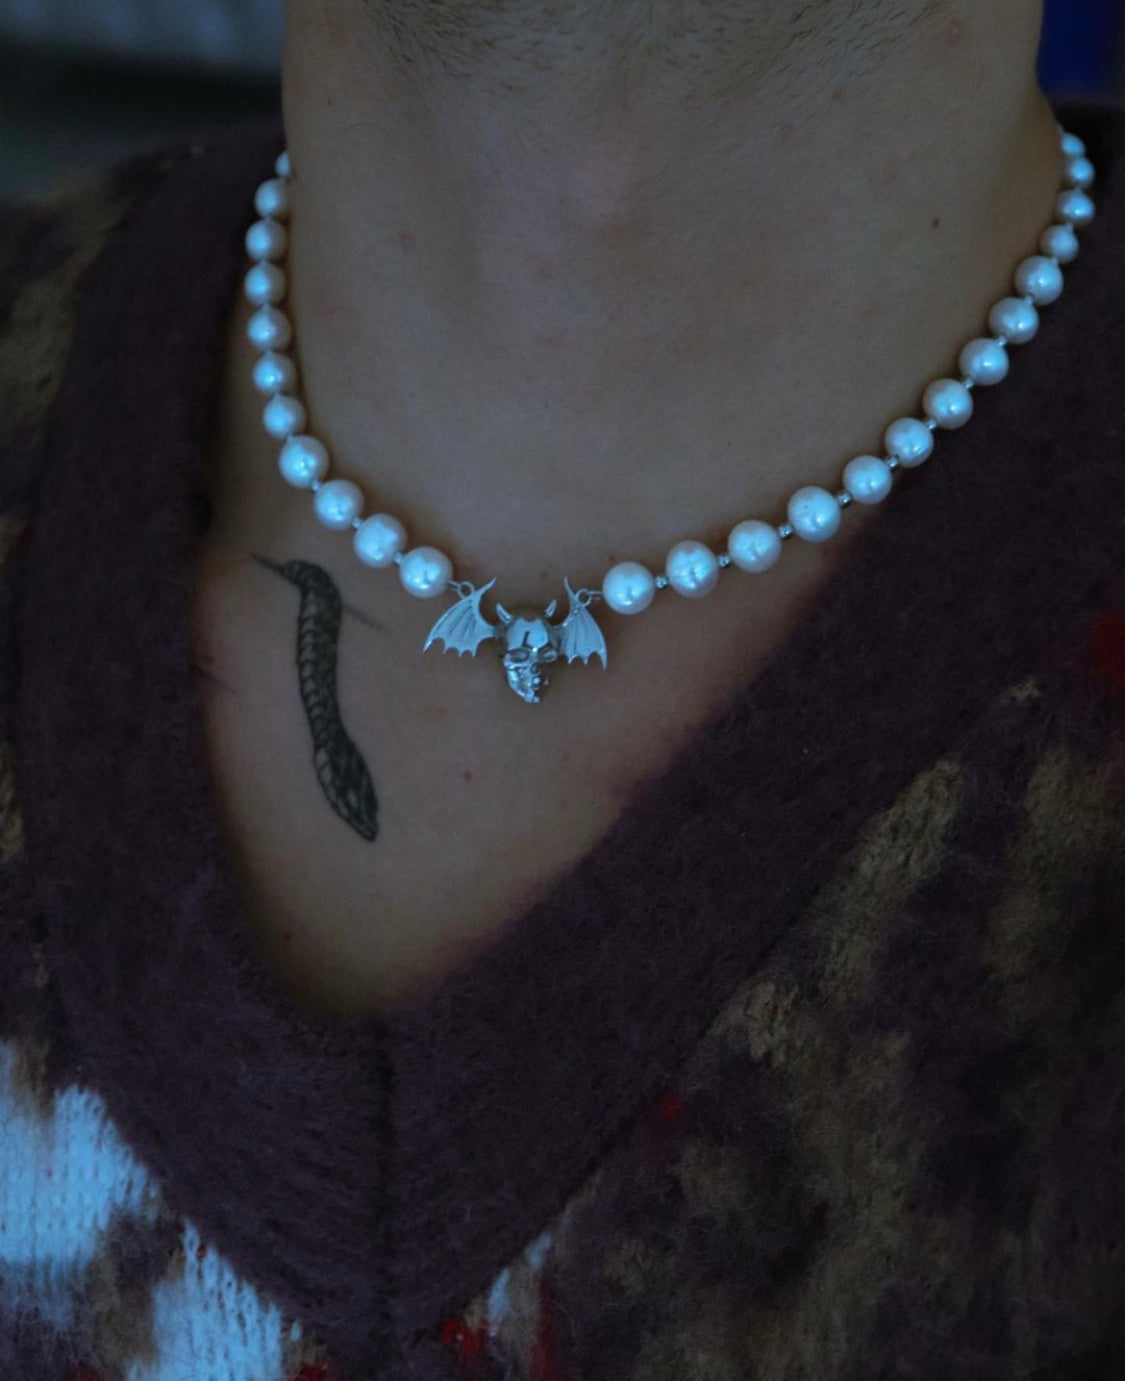 Winged Skull Pearl Necklace - Fashion Jewelry by Yordy.